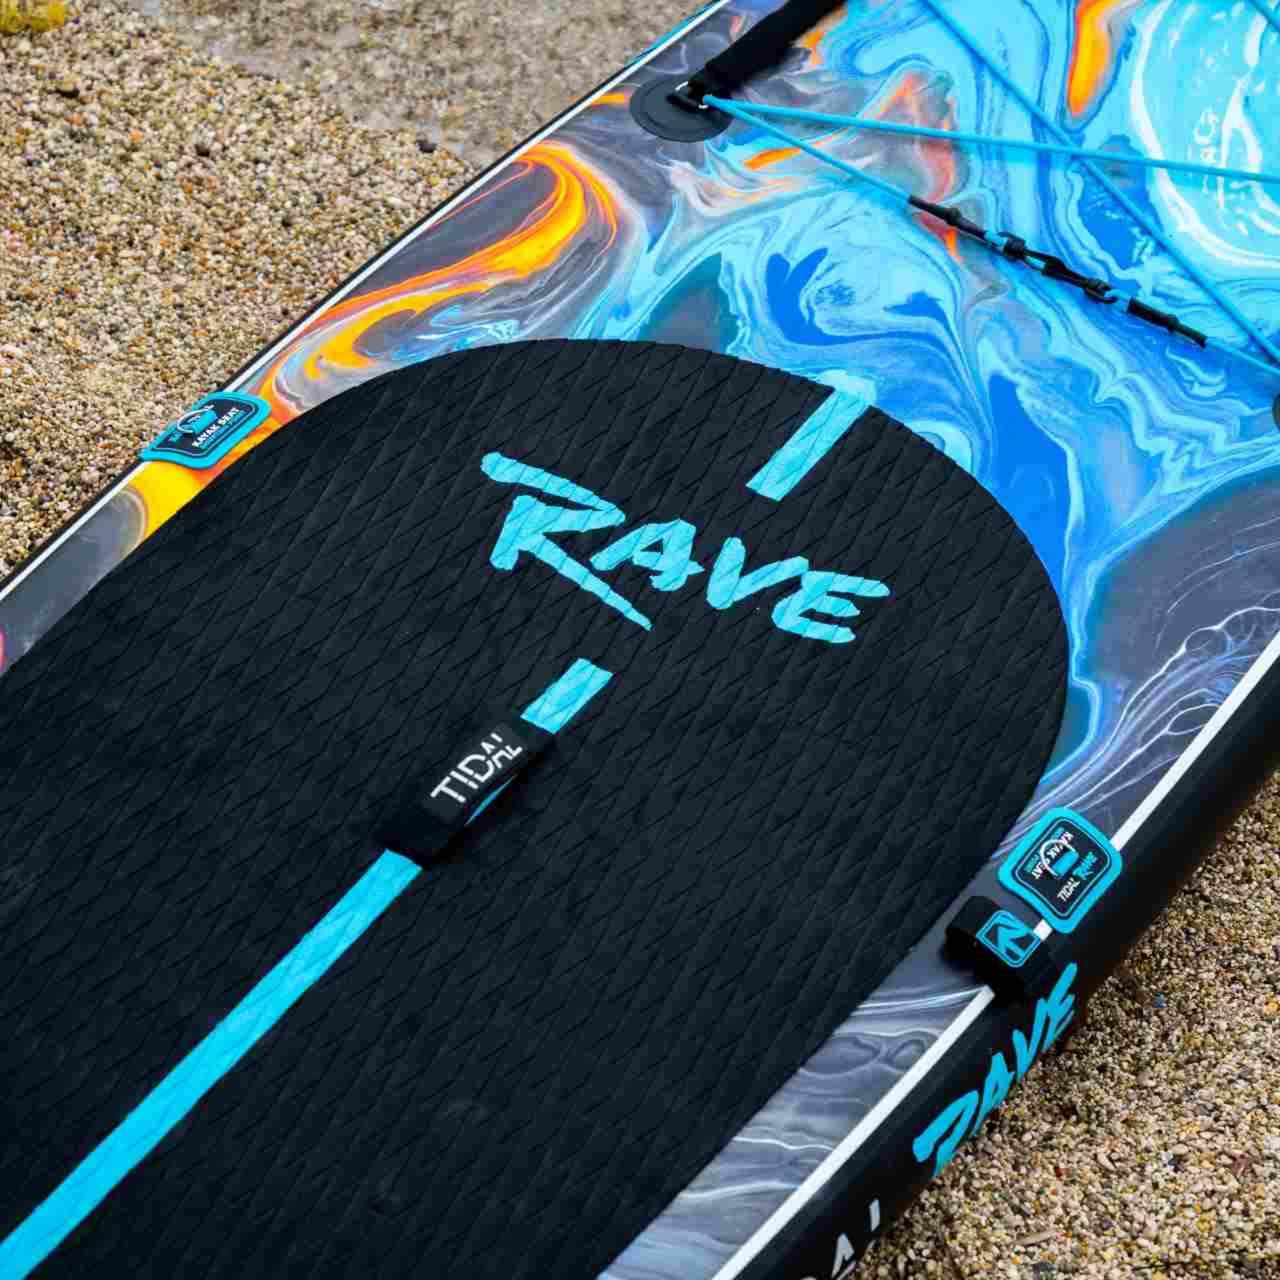 awesome looking inflatable standup paddle board